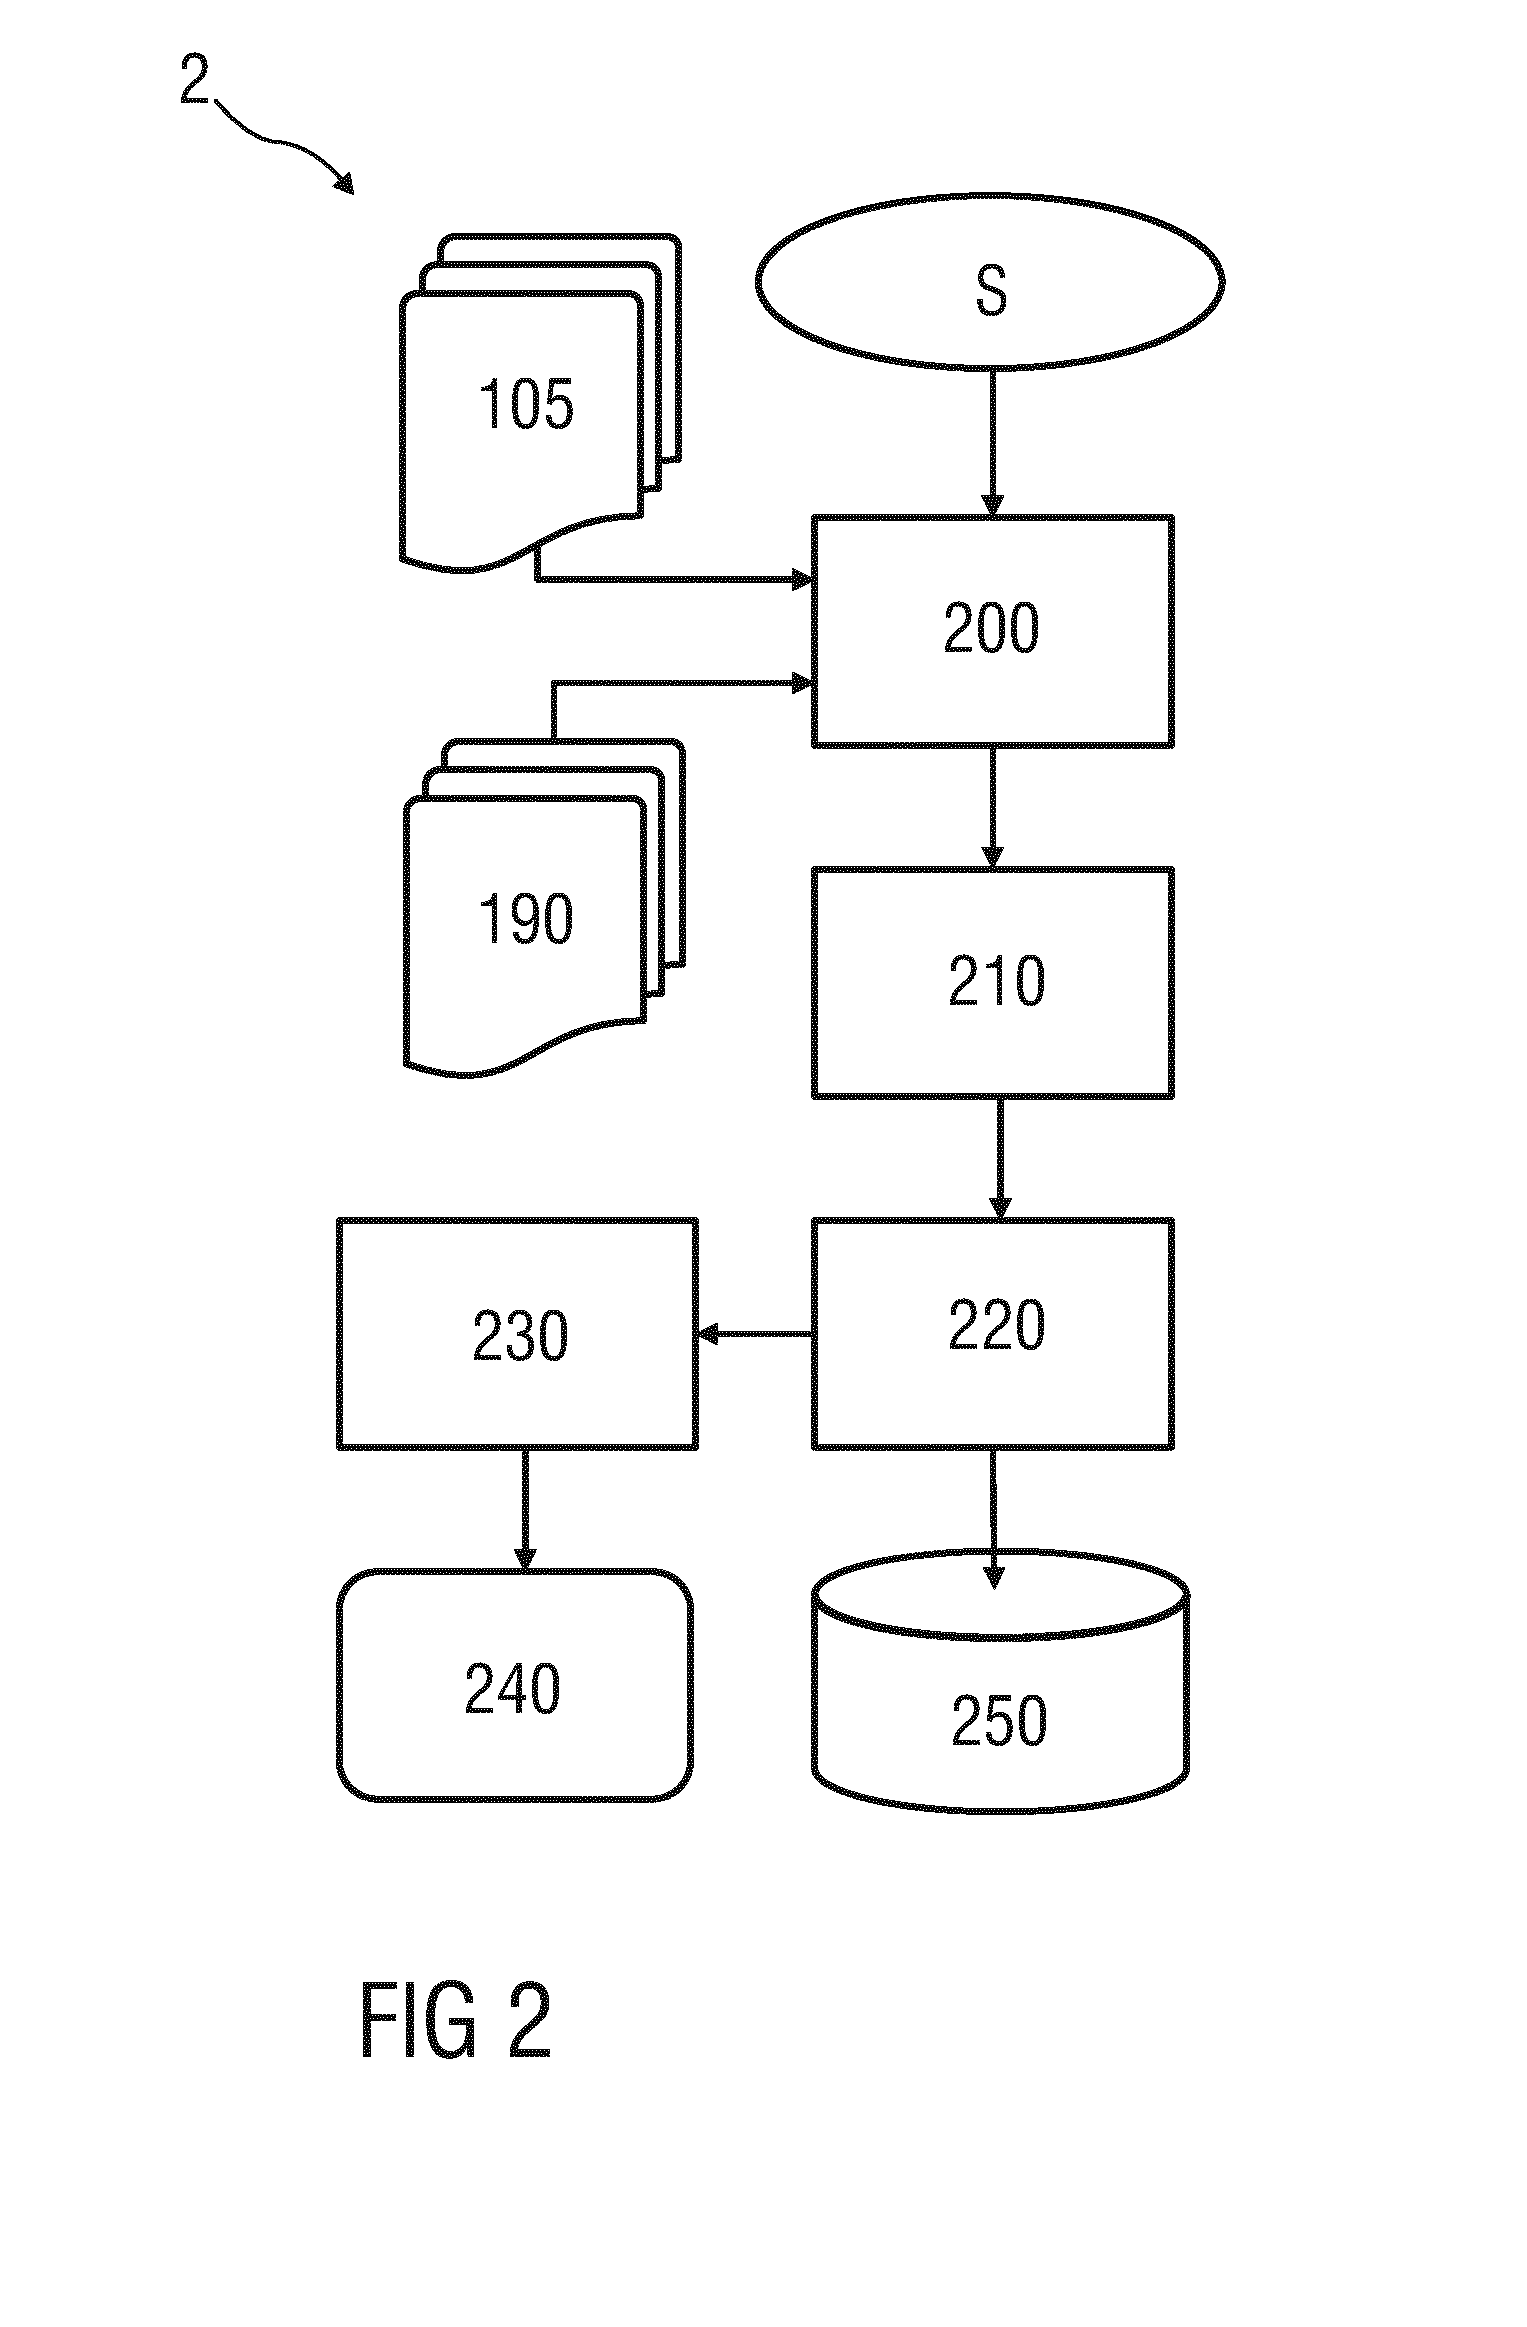 Method for binary classification of a query image